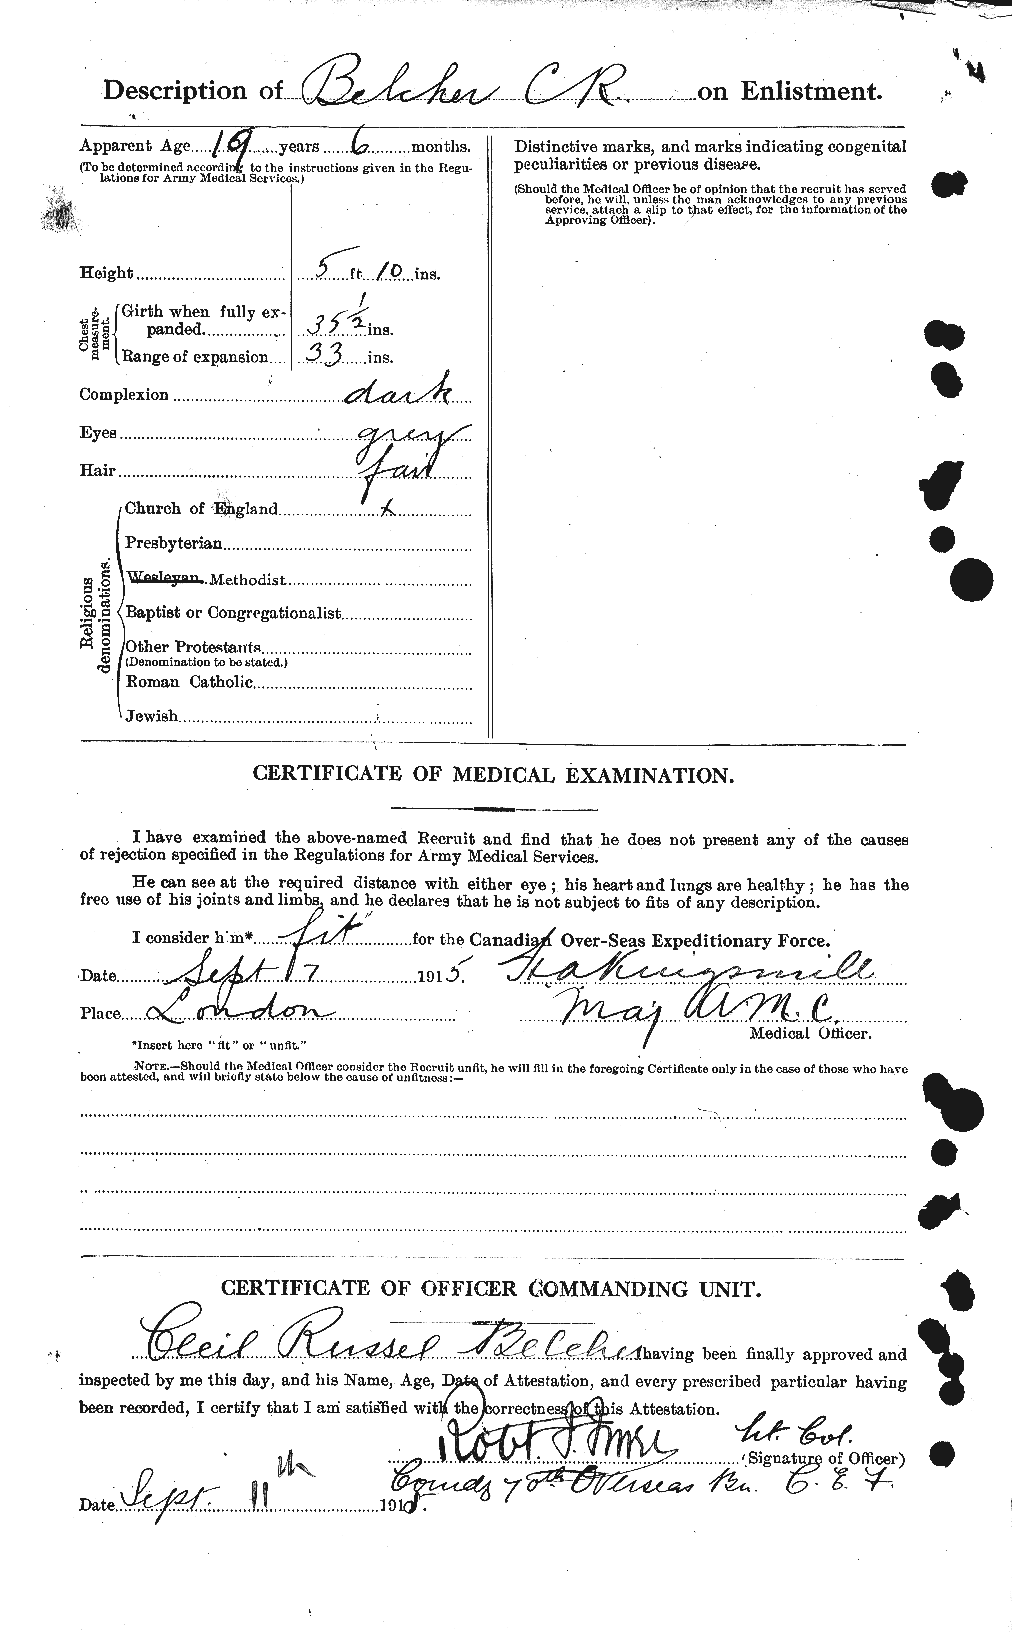 Personnel Records of the First World War - CEF 232576b